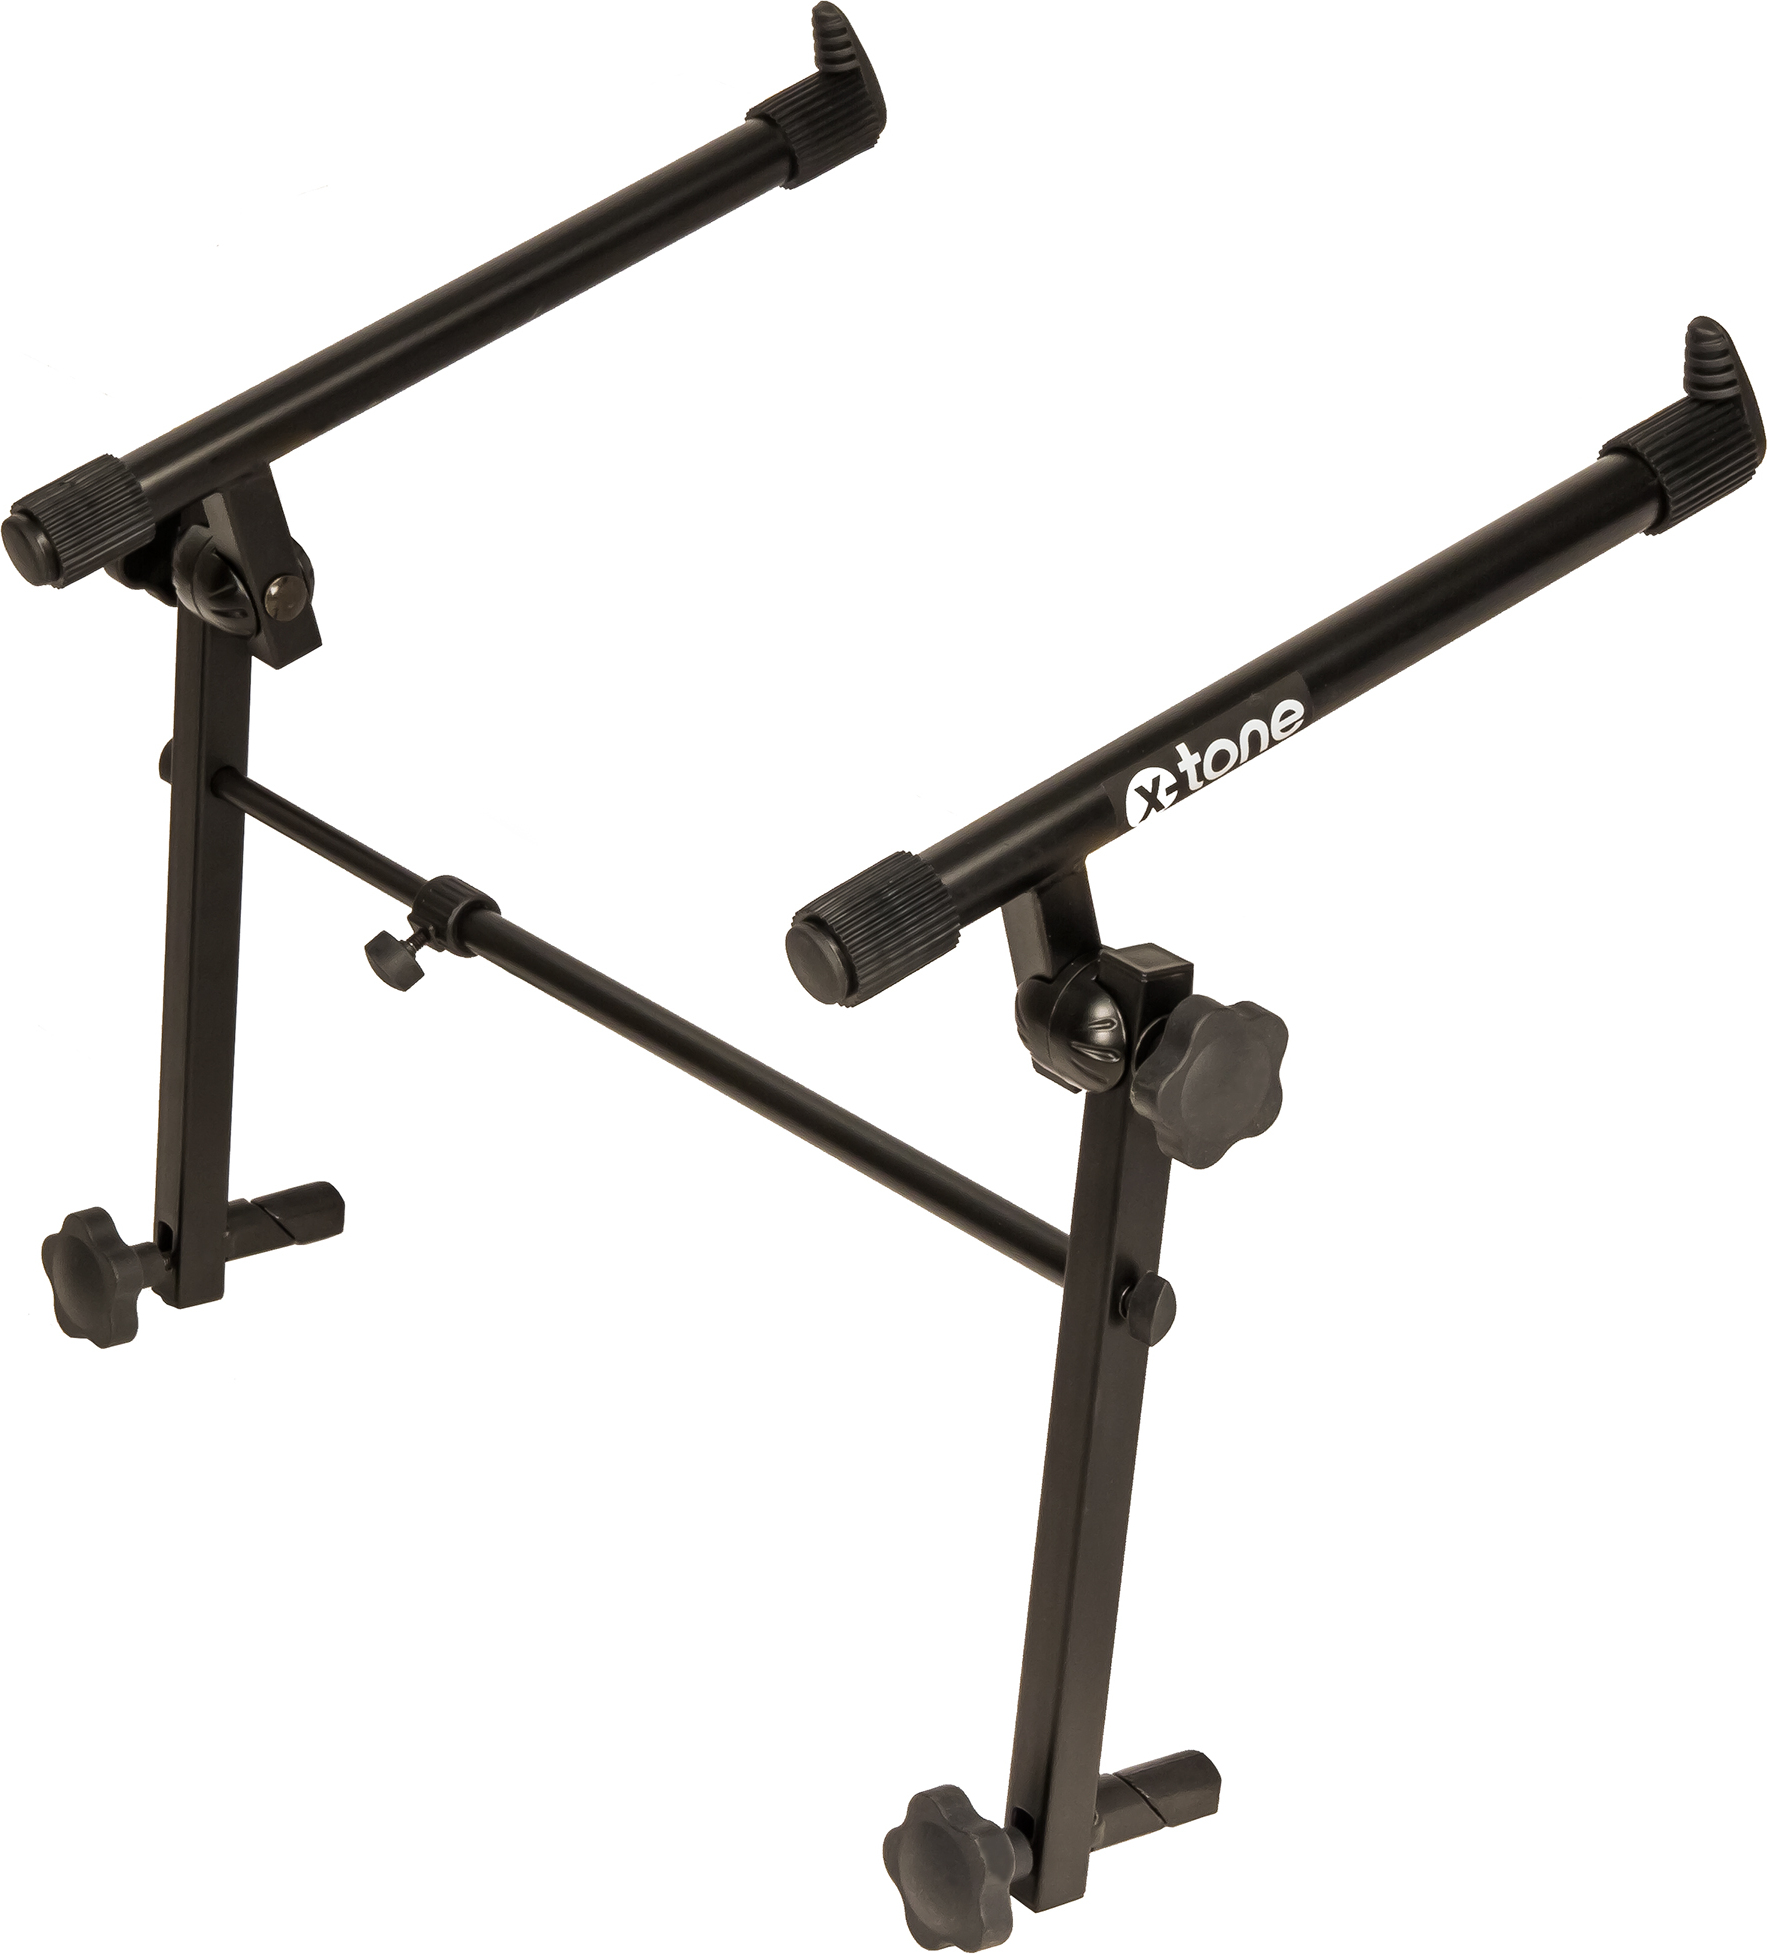 X-tone Xh6110 Extension Stand Clavier Premium - Stand & Support Clavier - Main picture